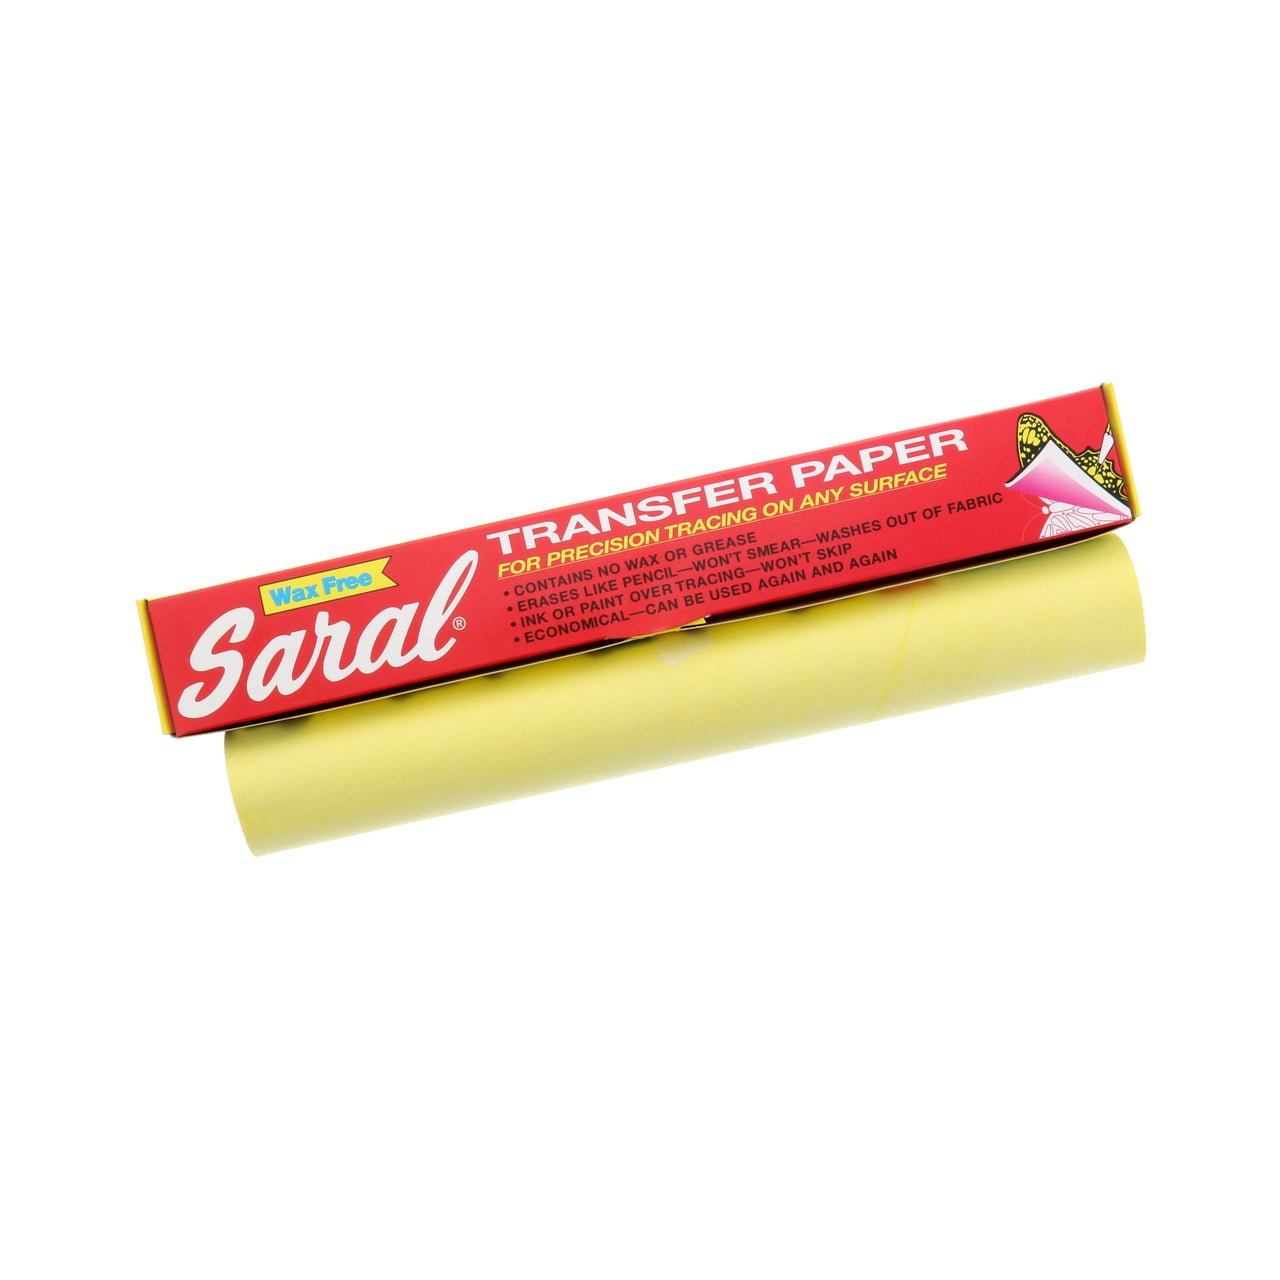 Saral Transfer Paper - 12 inch by 12 ft roll - Yellow - merriartist.com